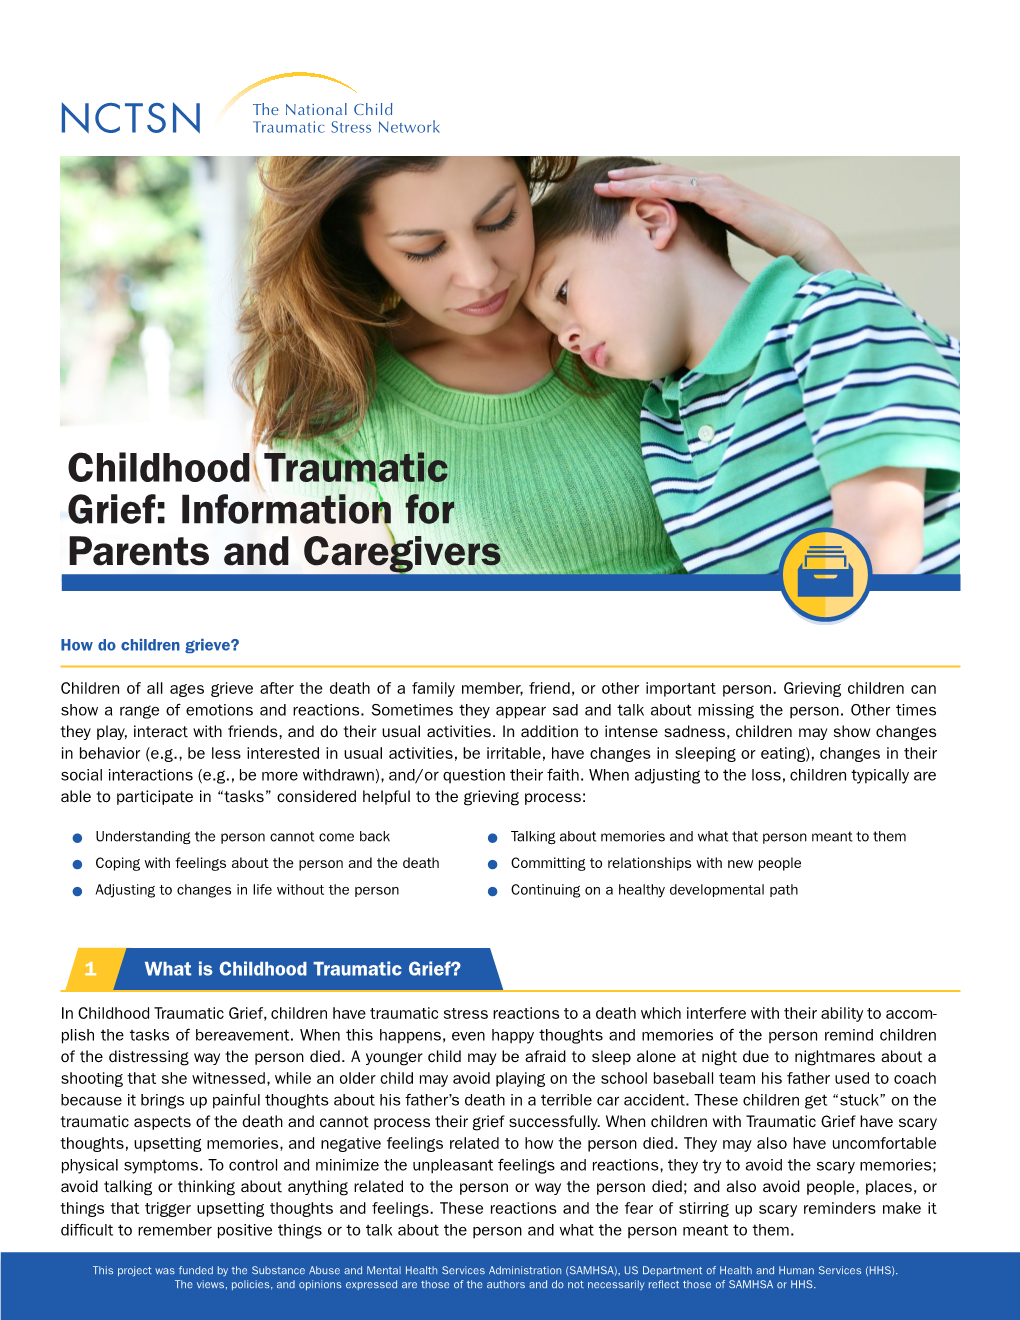 Childhood Traumatic Grief: Information for Parents and Caregivers